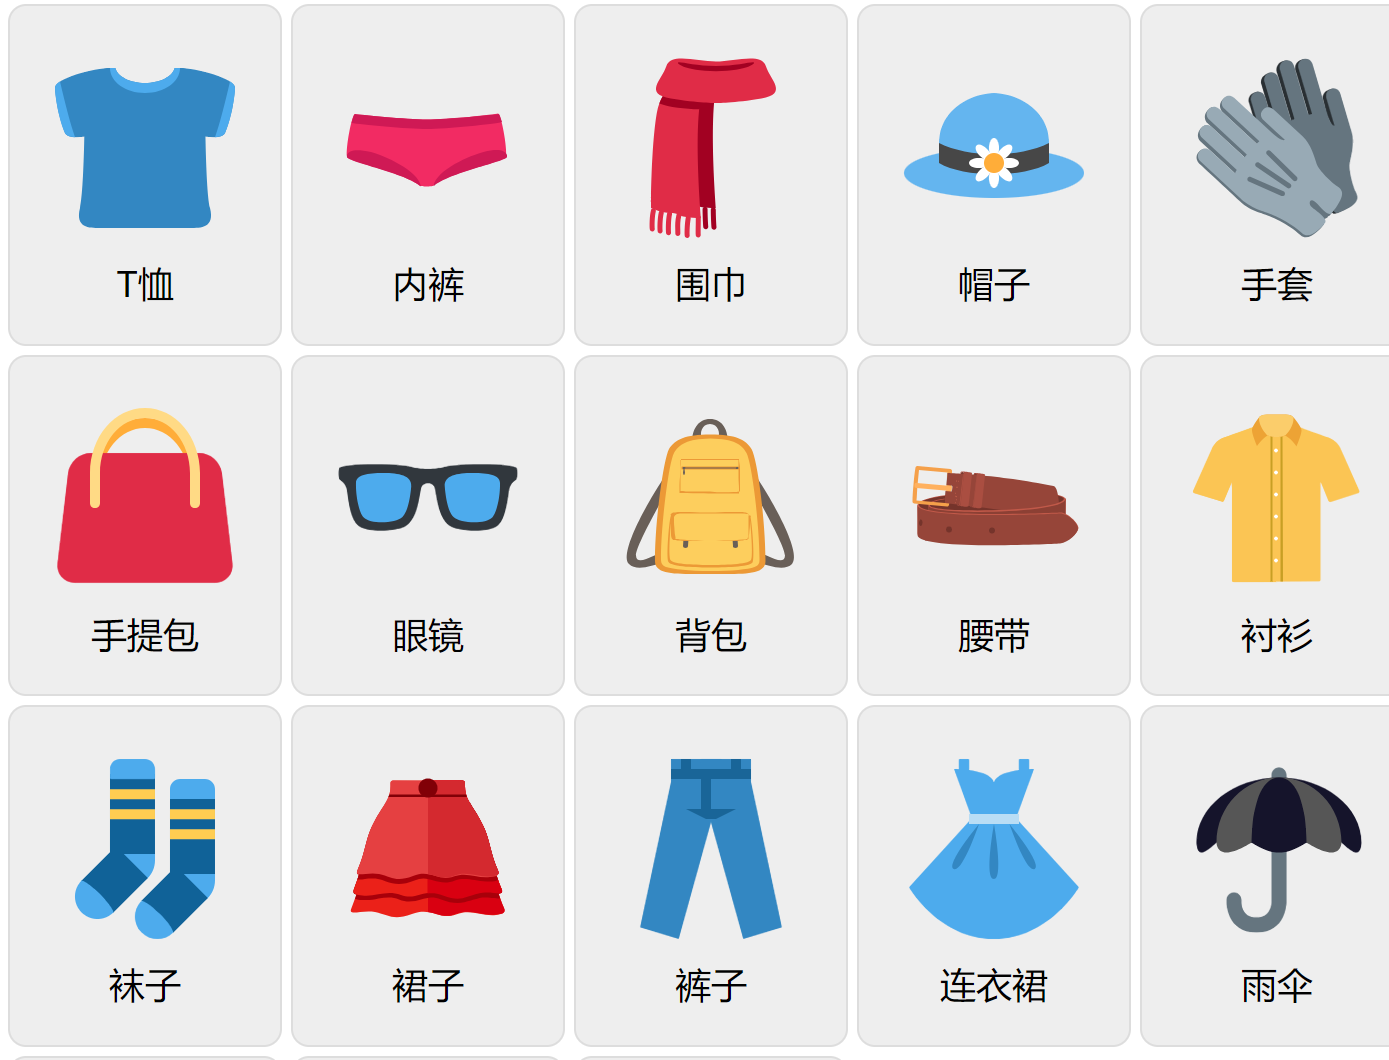 Clothes in Mandarin Chinese